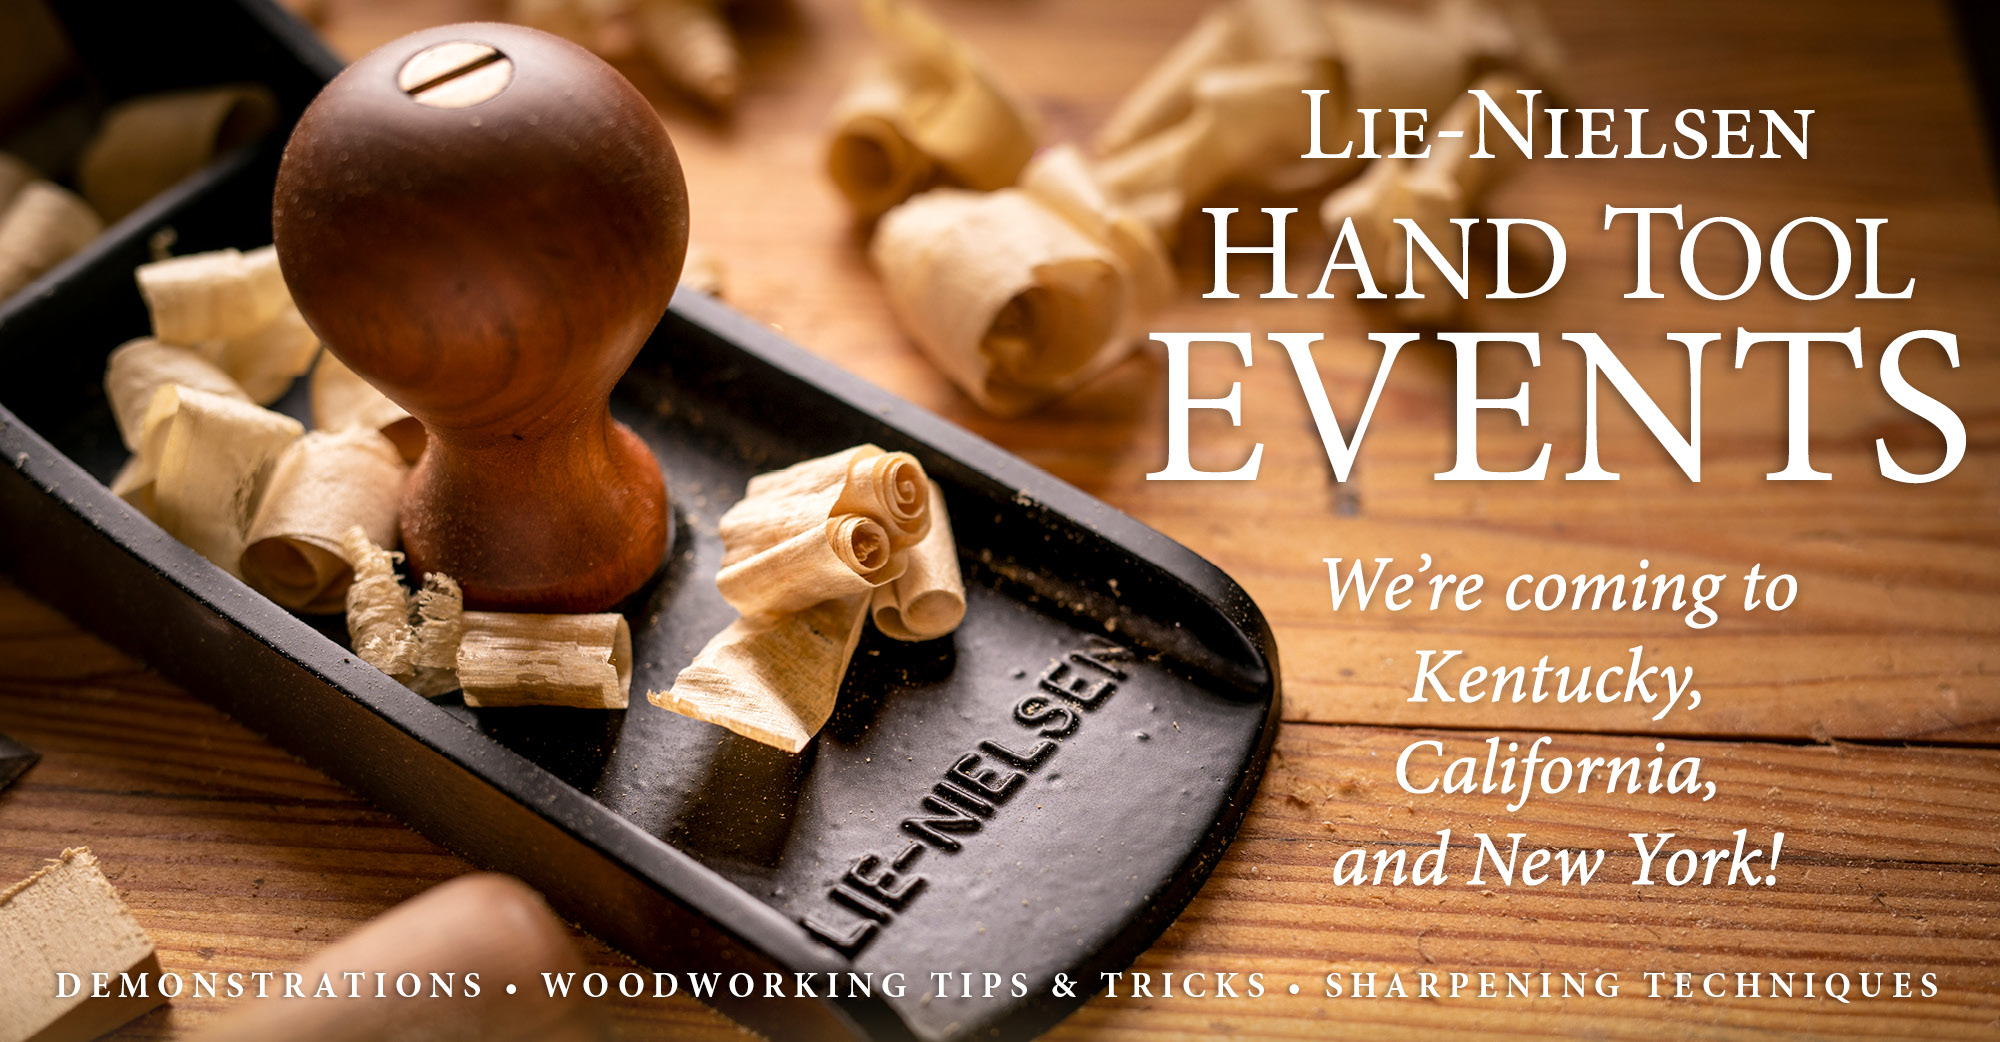 Hand Tool Events